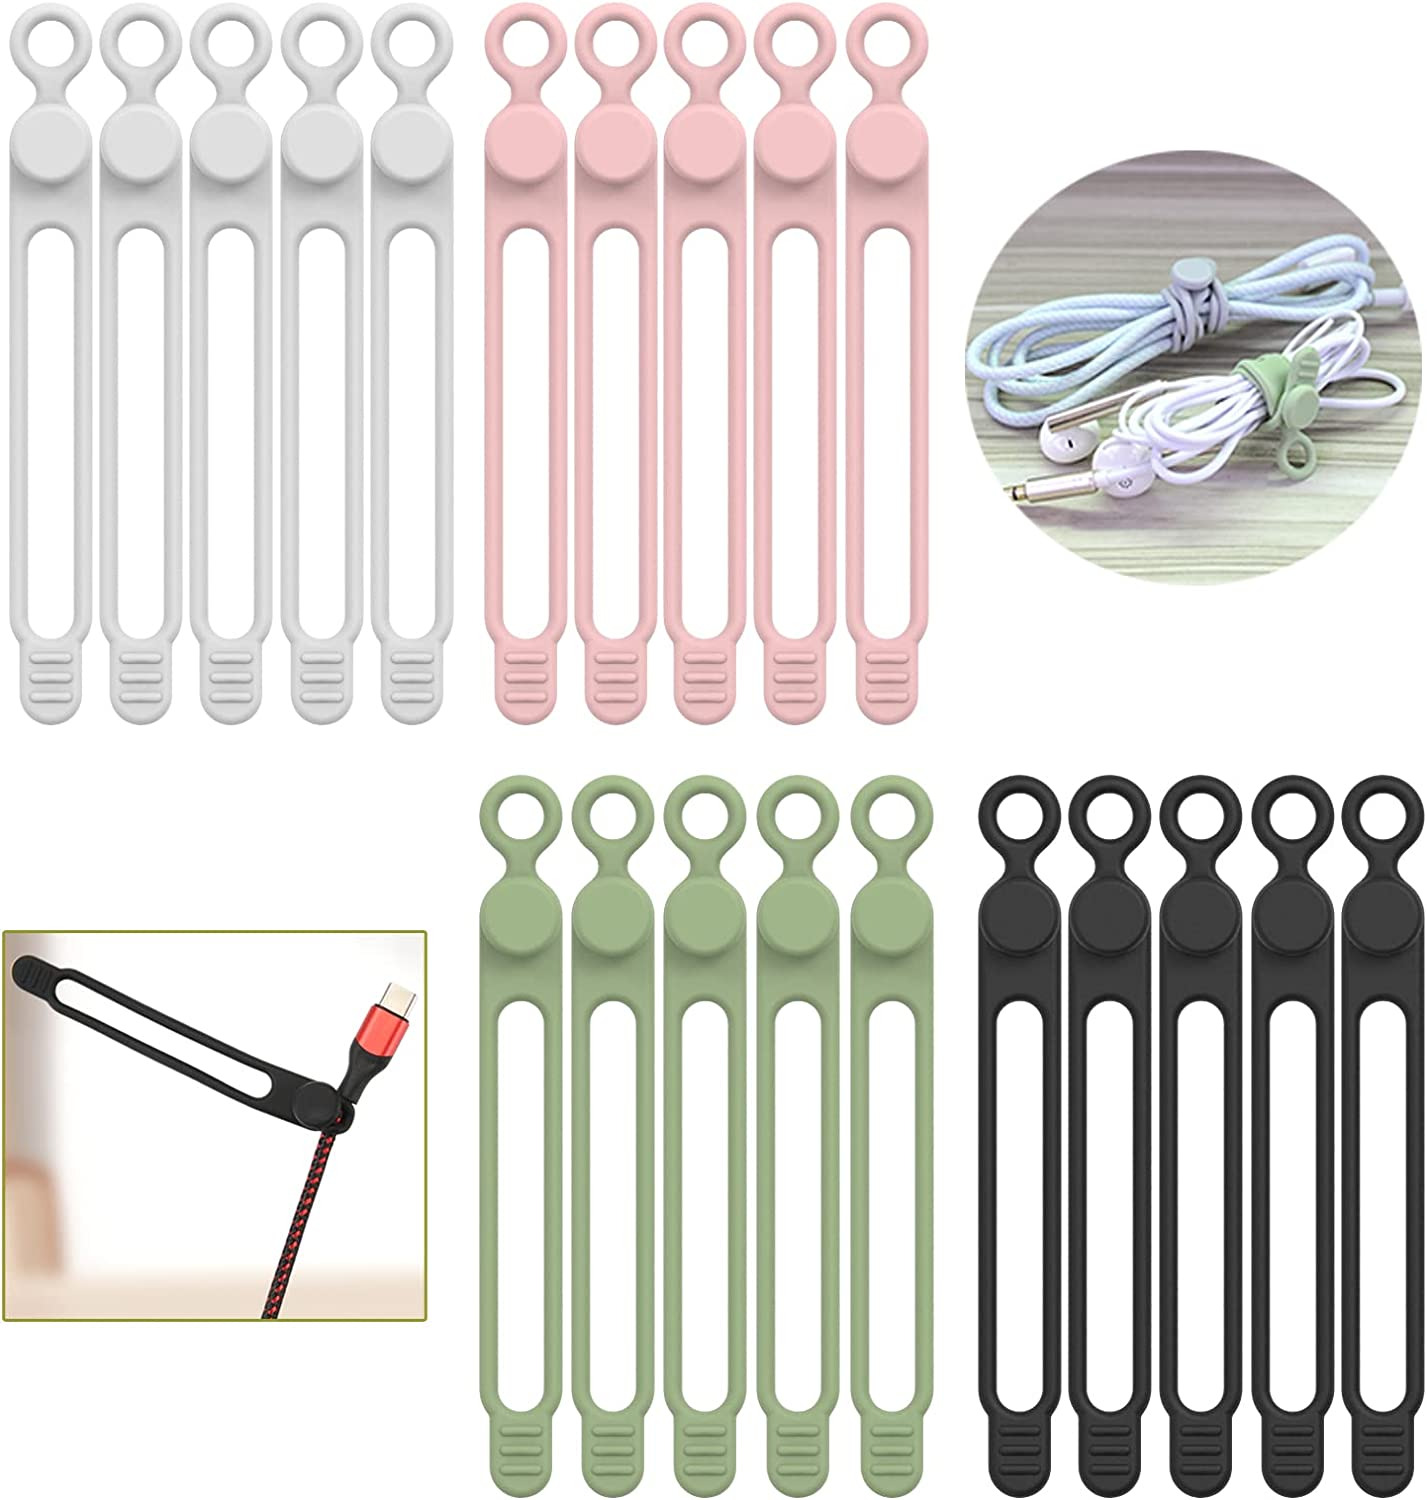 [20Park] Silicone Cable Ties,Reusable Cable Management Organizer, Multipurpose E